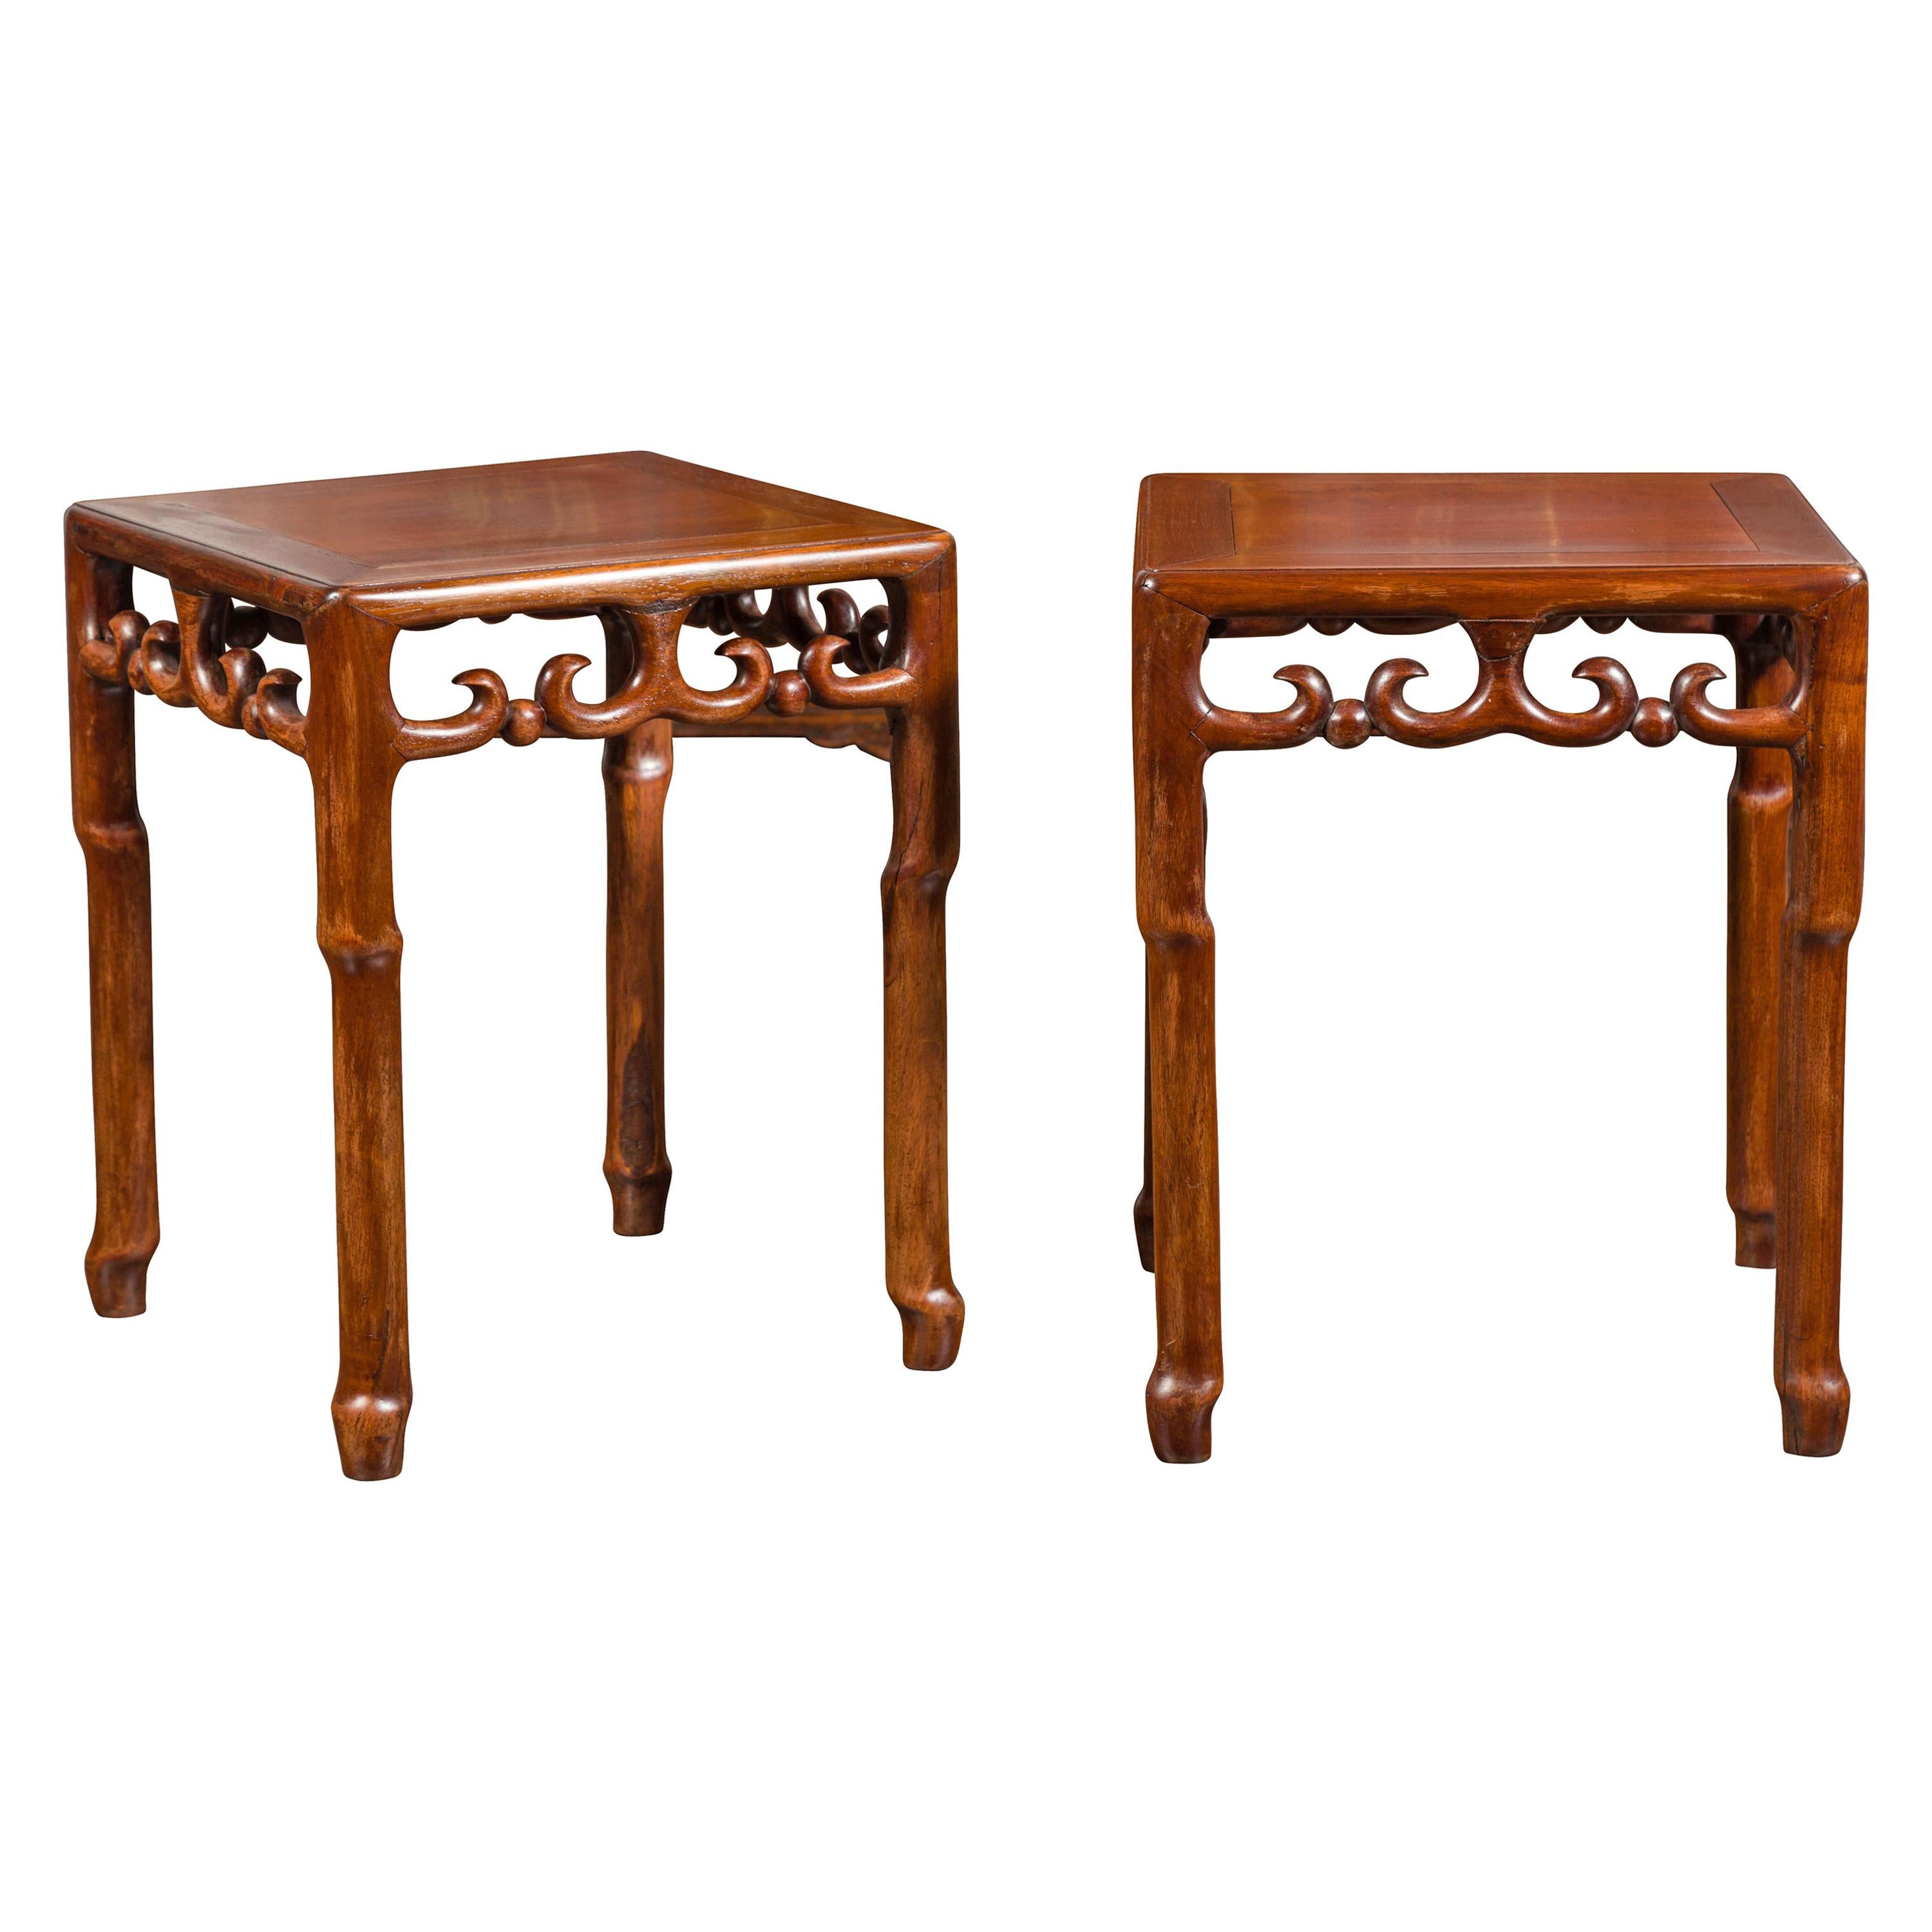 Pair of Asian Midcentury Mahogany Side Tables with Scrolling Fretwork Motifs For Sale